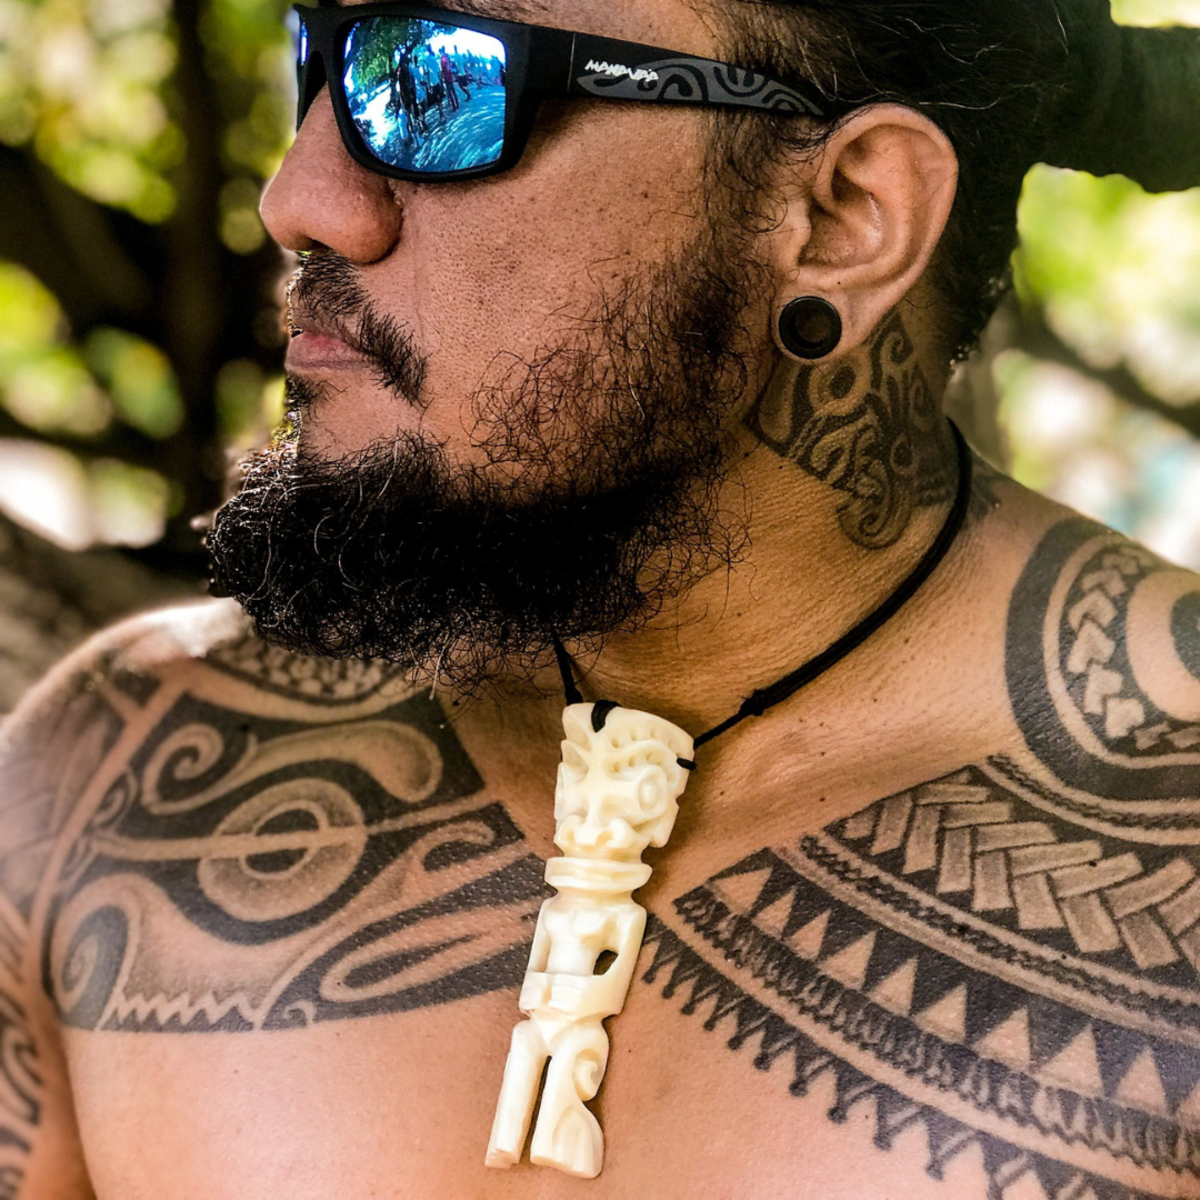 Tribal tattoos are one of the most popular tattoo styles in the world.